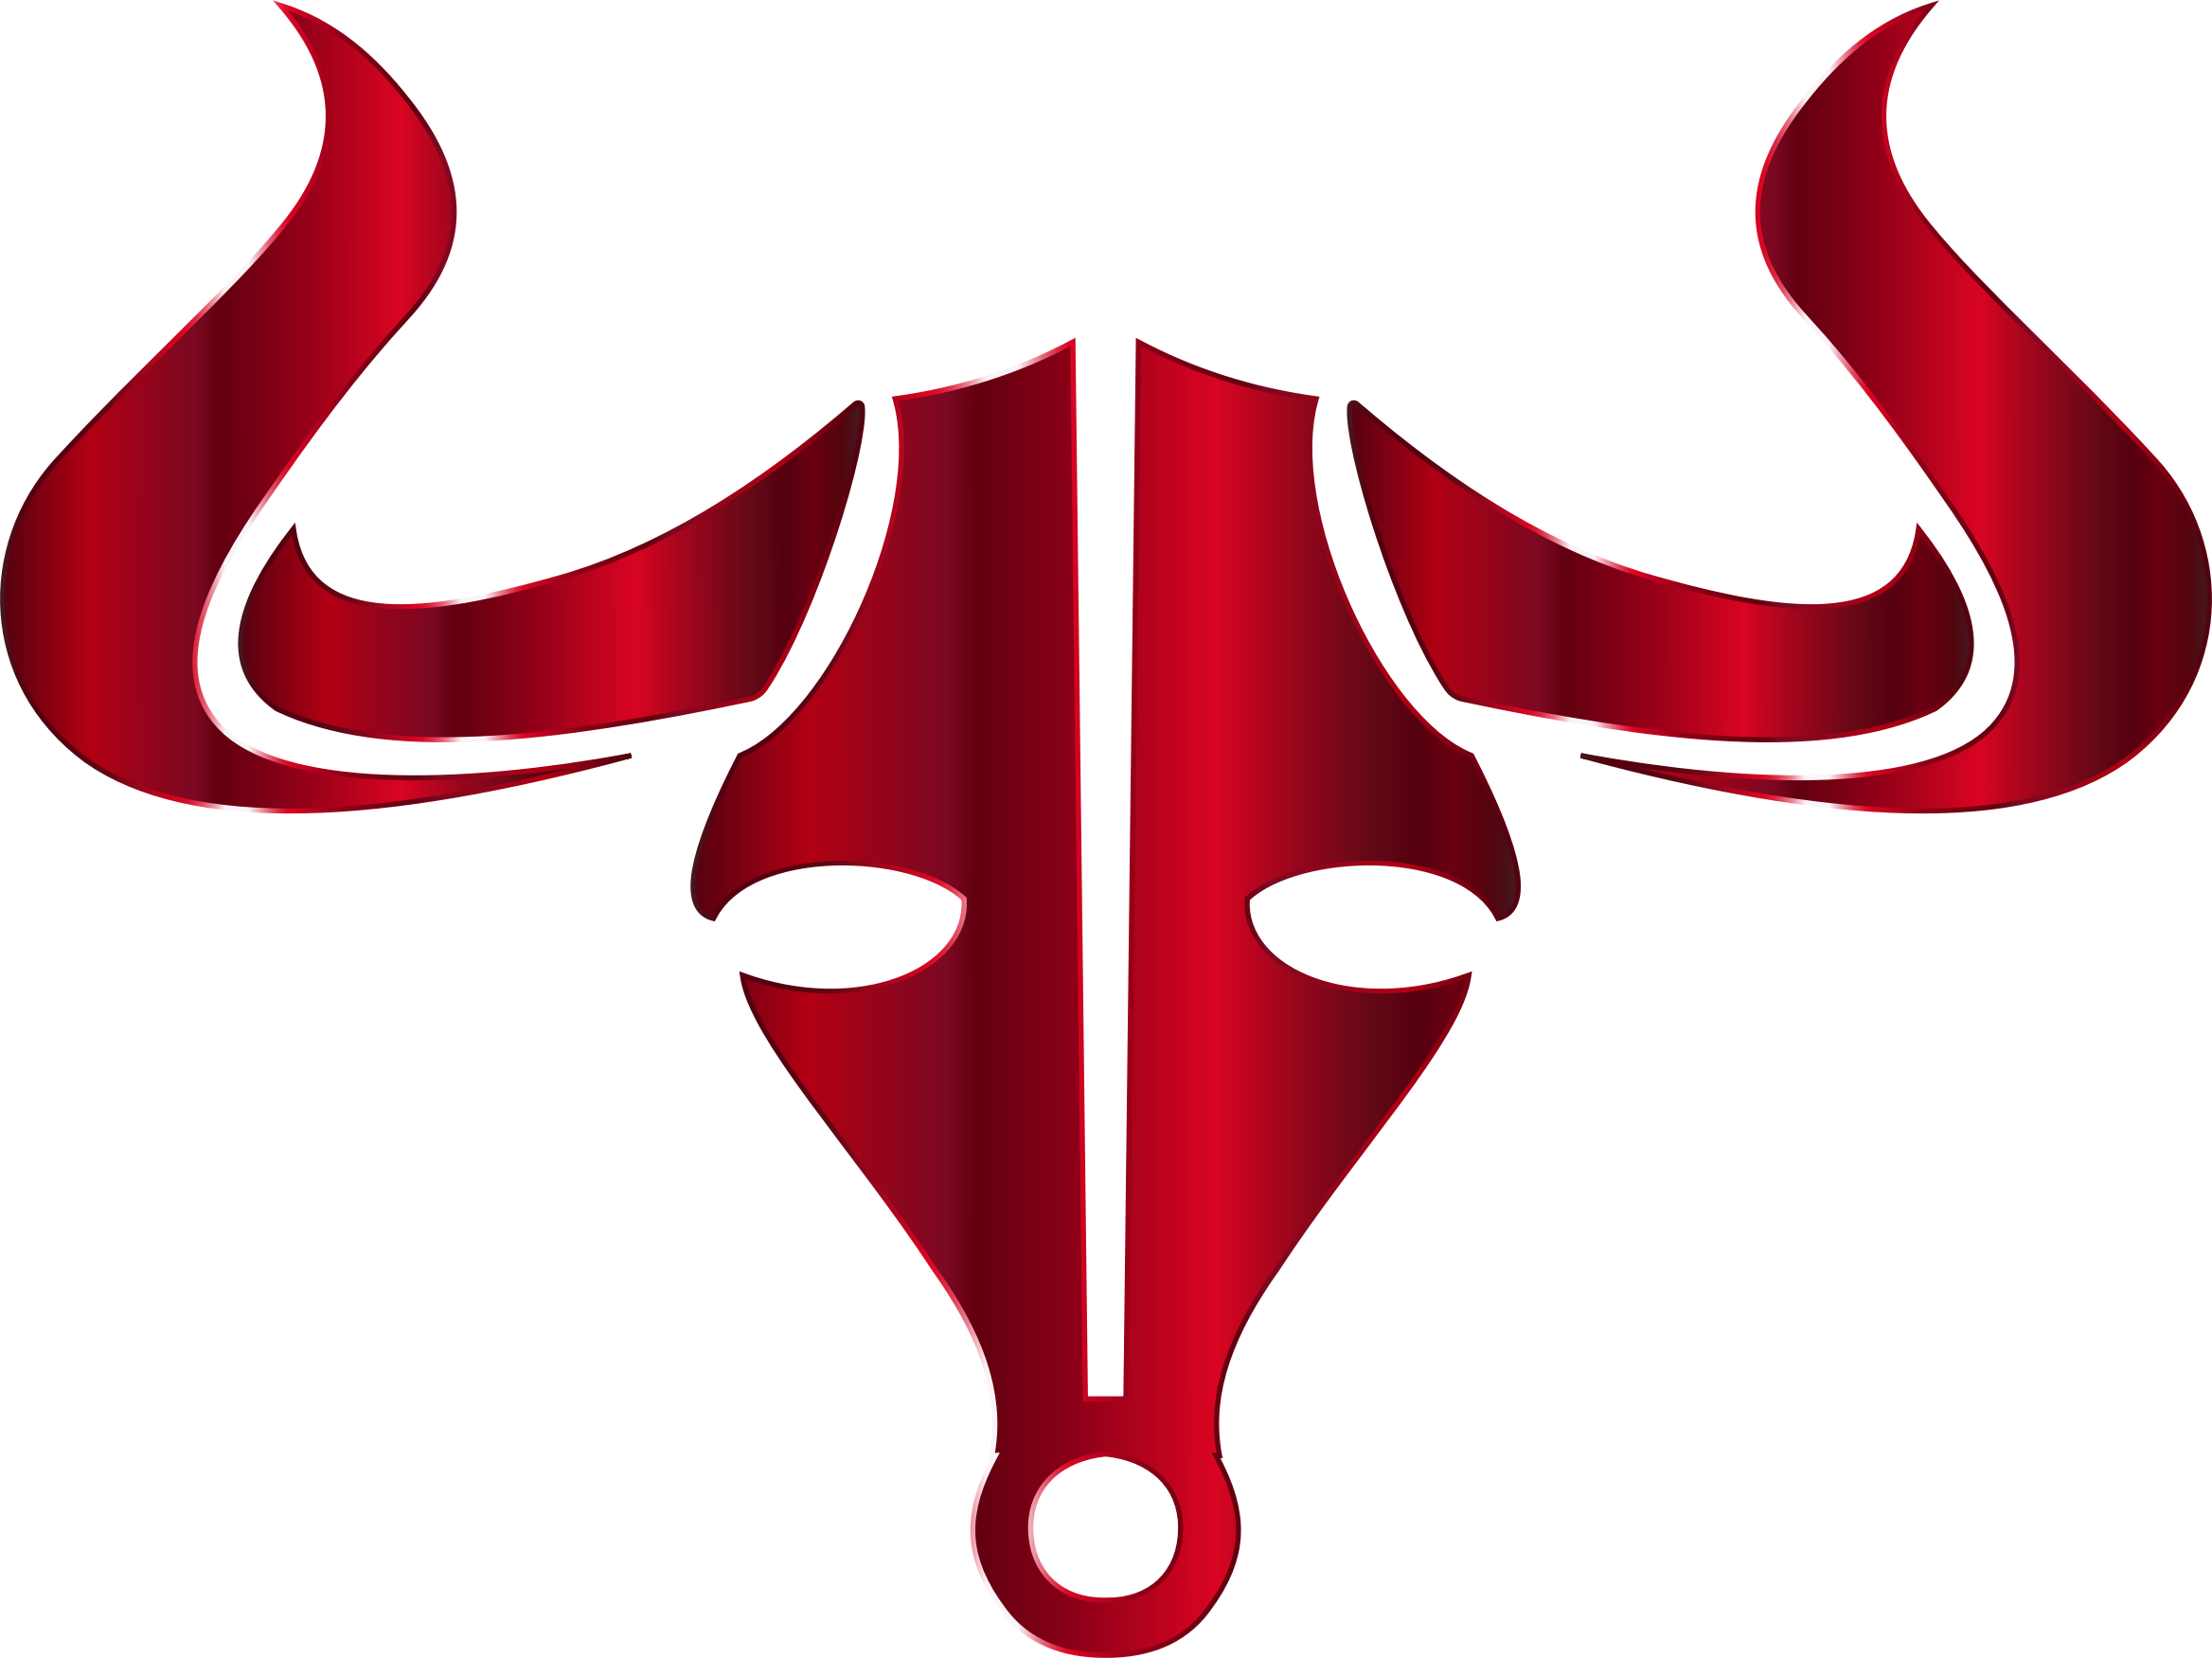 Free Bull Transparent, Download Free Clip Art, Free Clip Art on Clipart